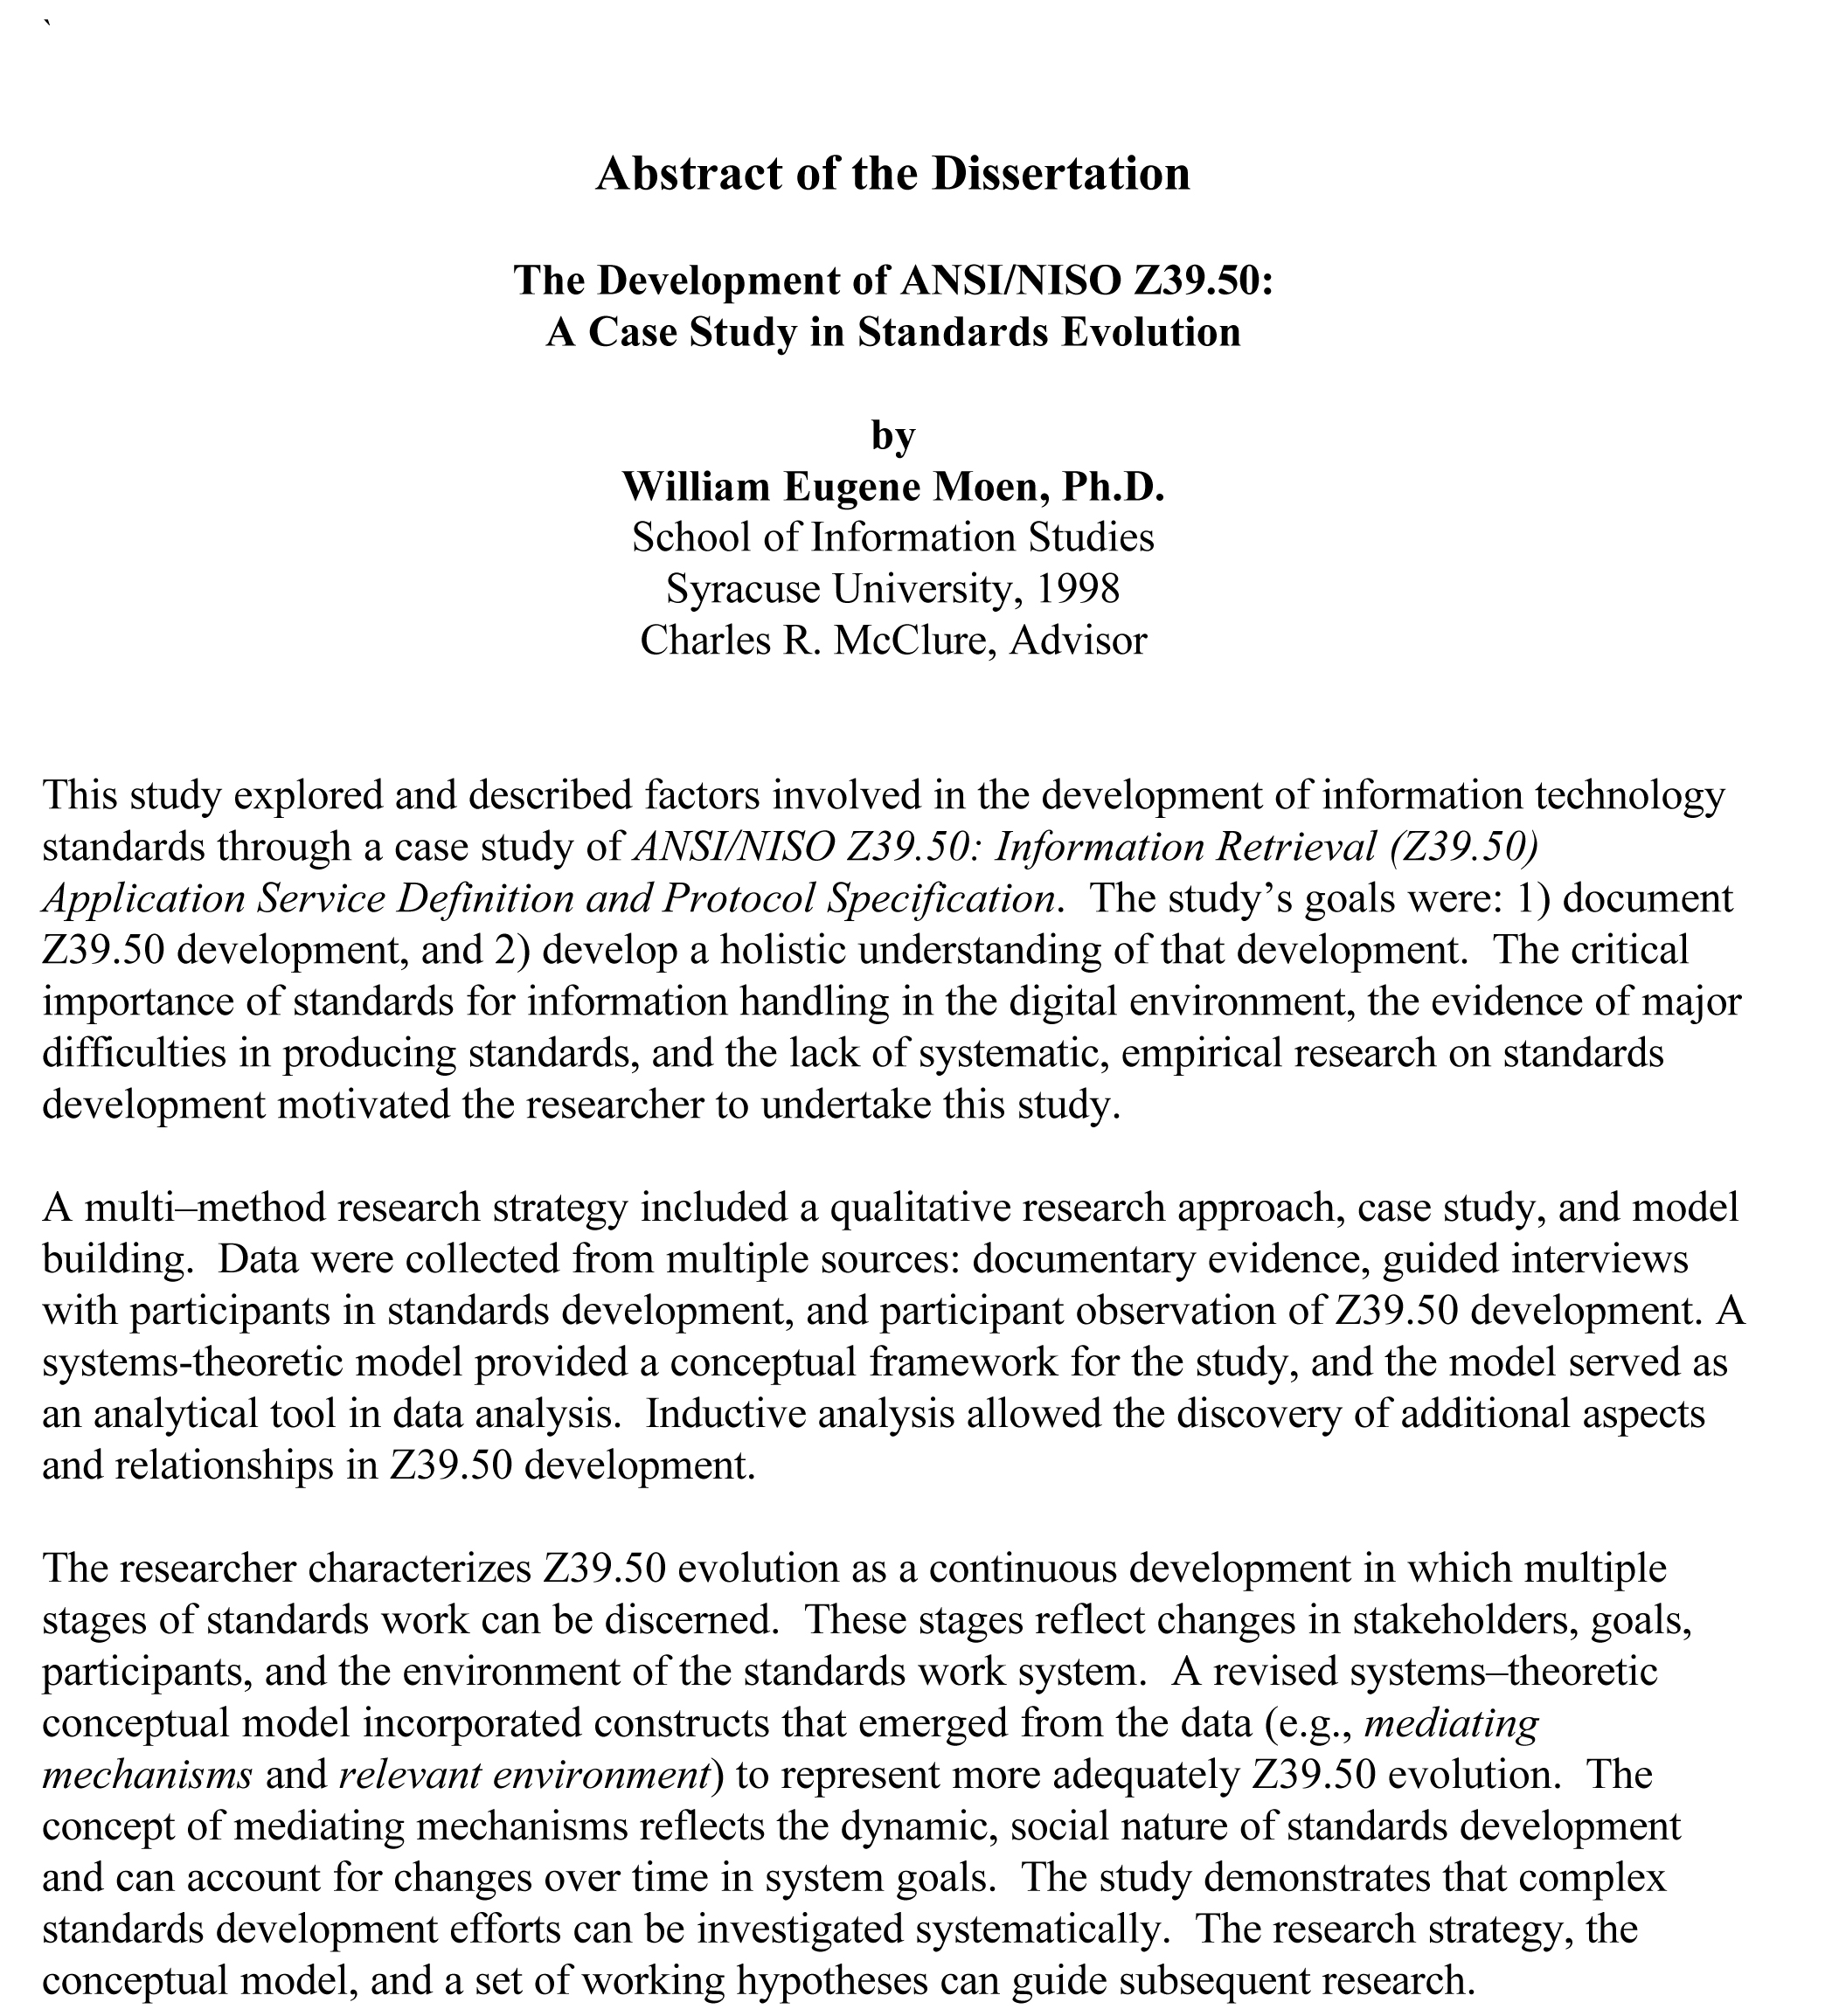 Masters dissertation abstracts online